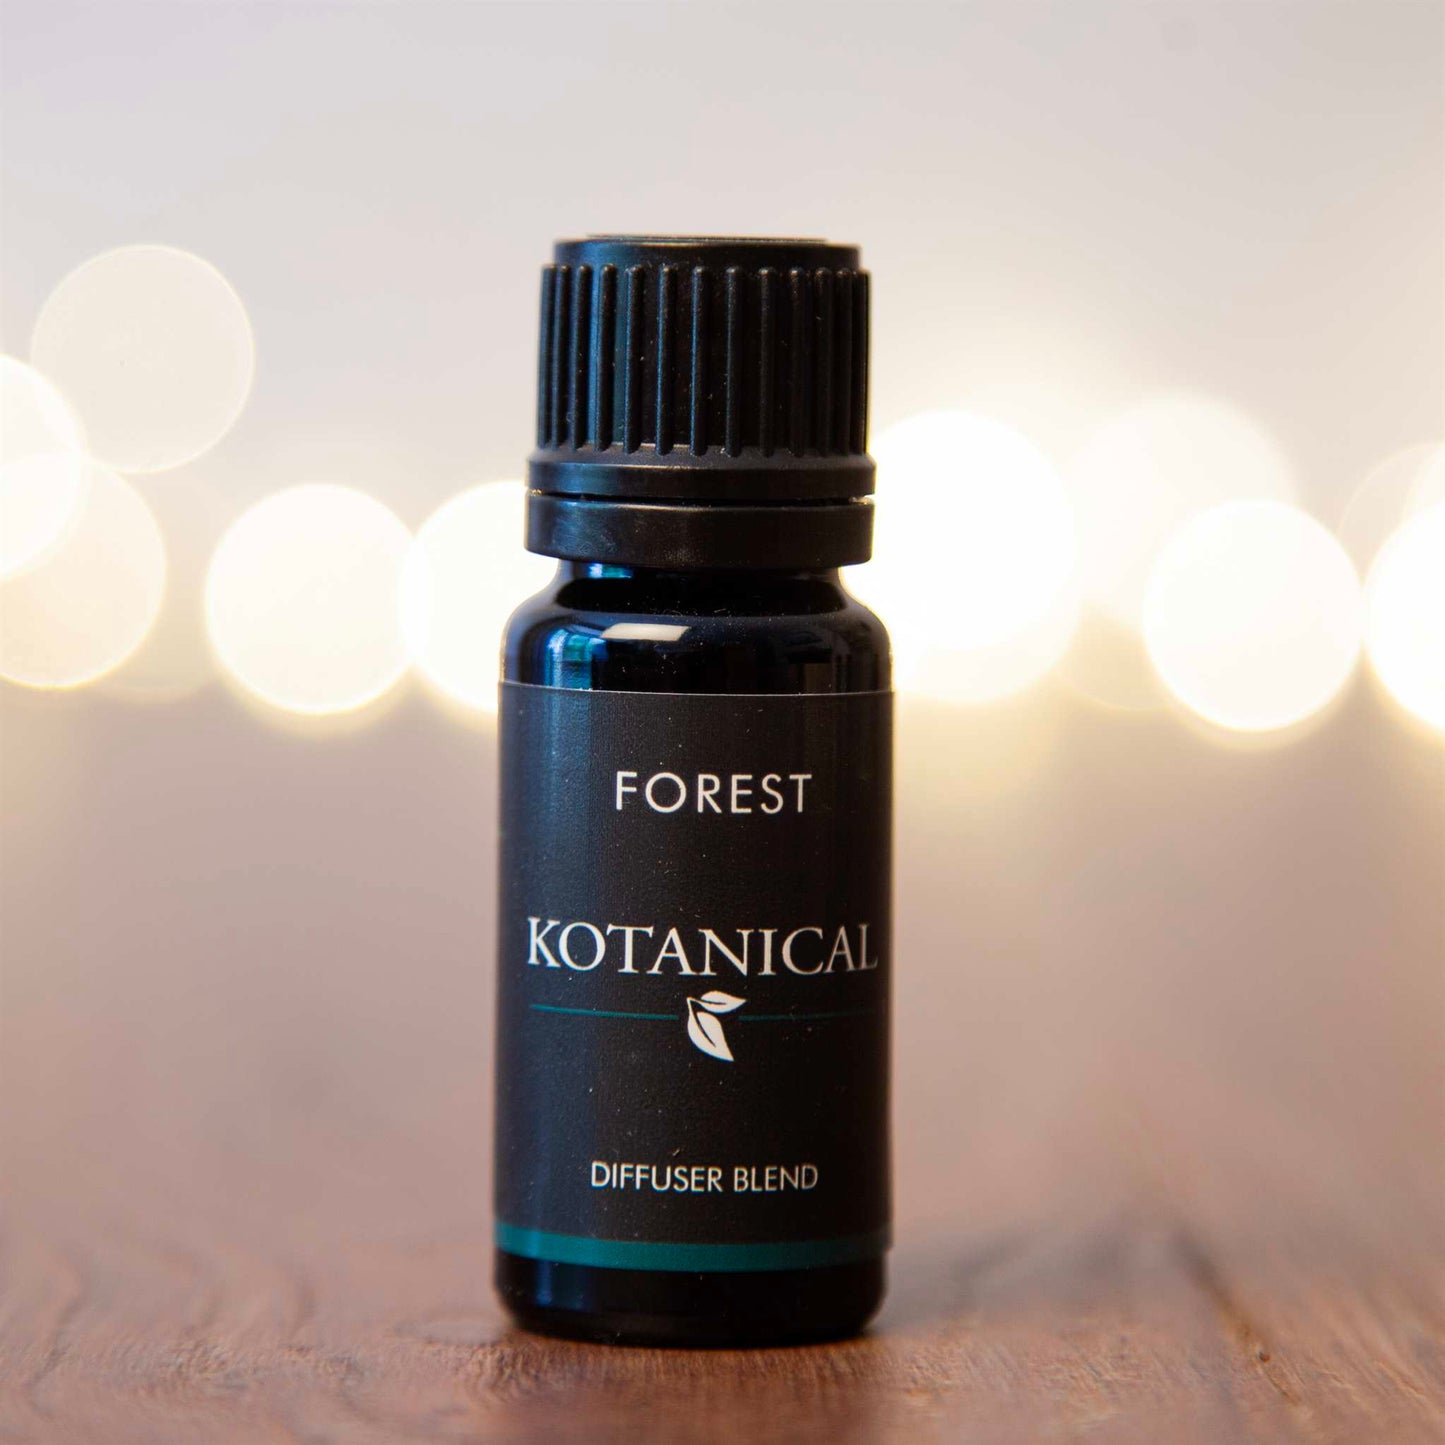 Load image into Gallery viewer, Kotanical Essential Oil Forest Essential Oil Diffuser Blend 10ml - Kotanical
